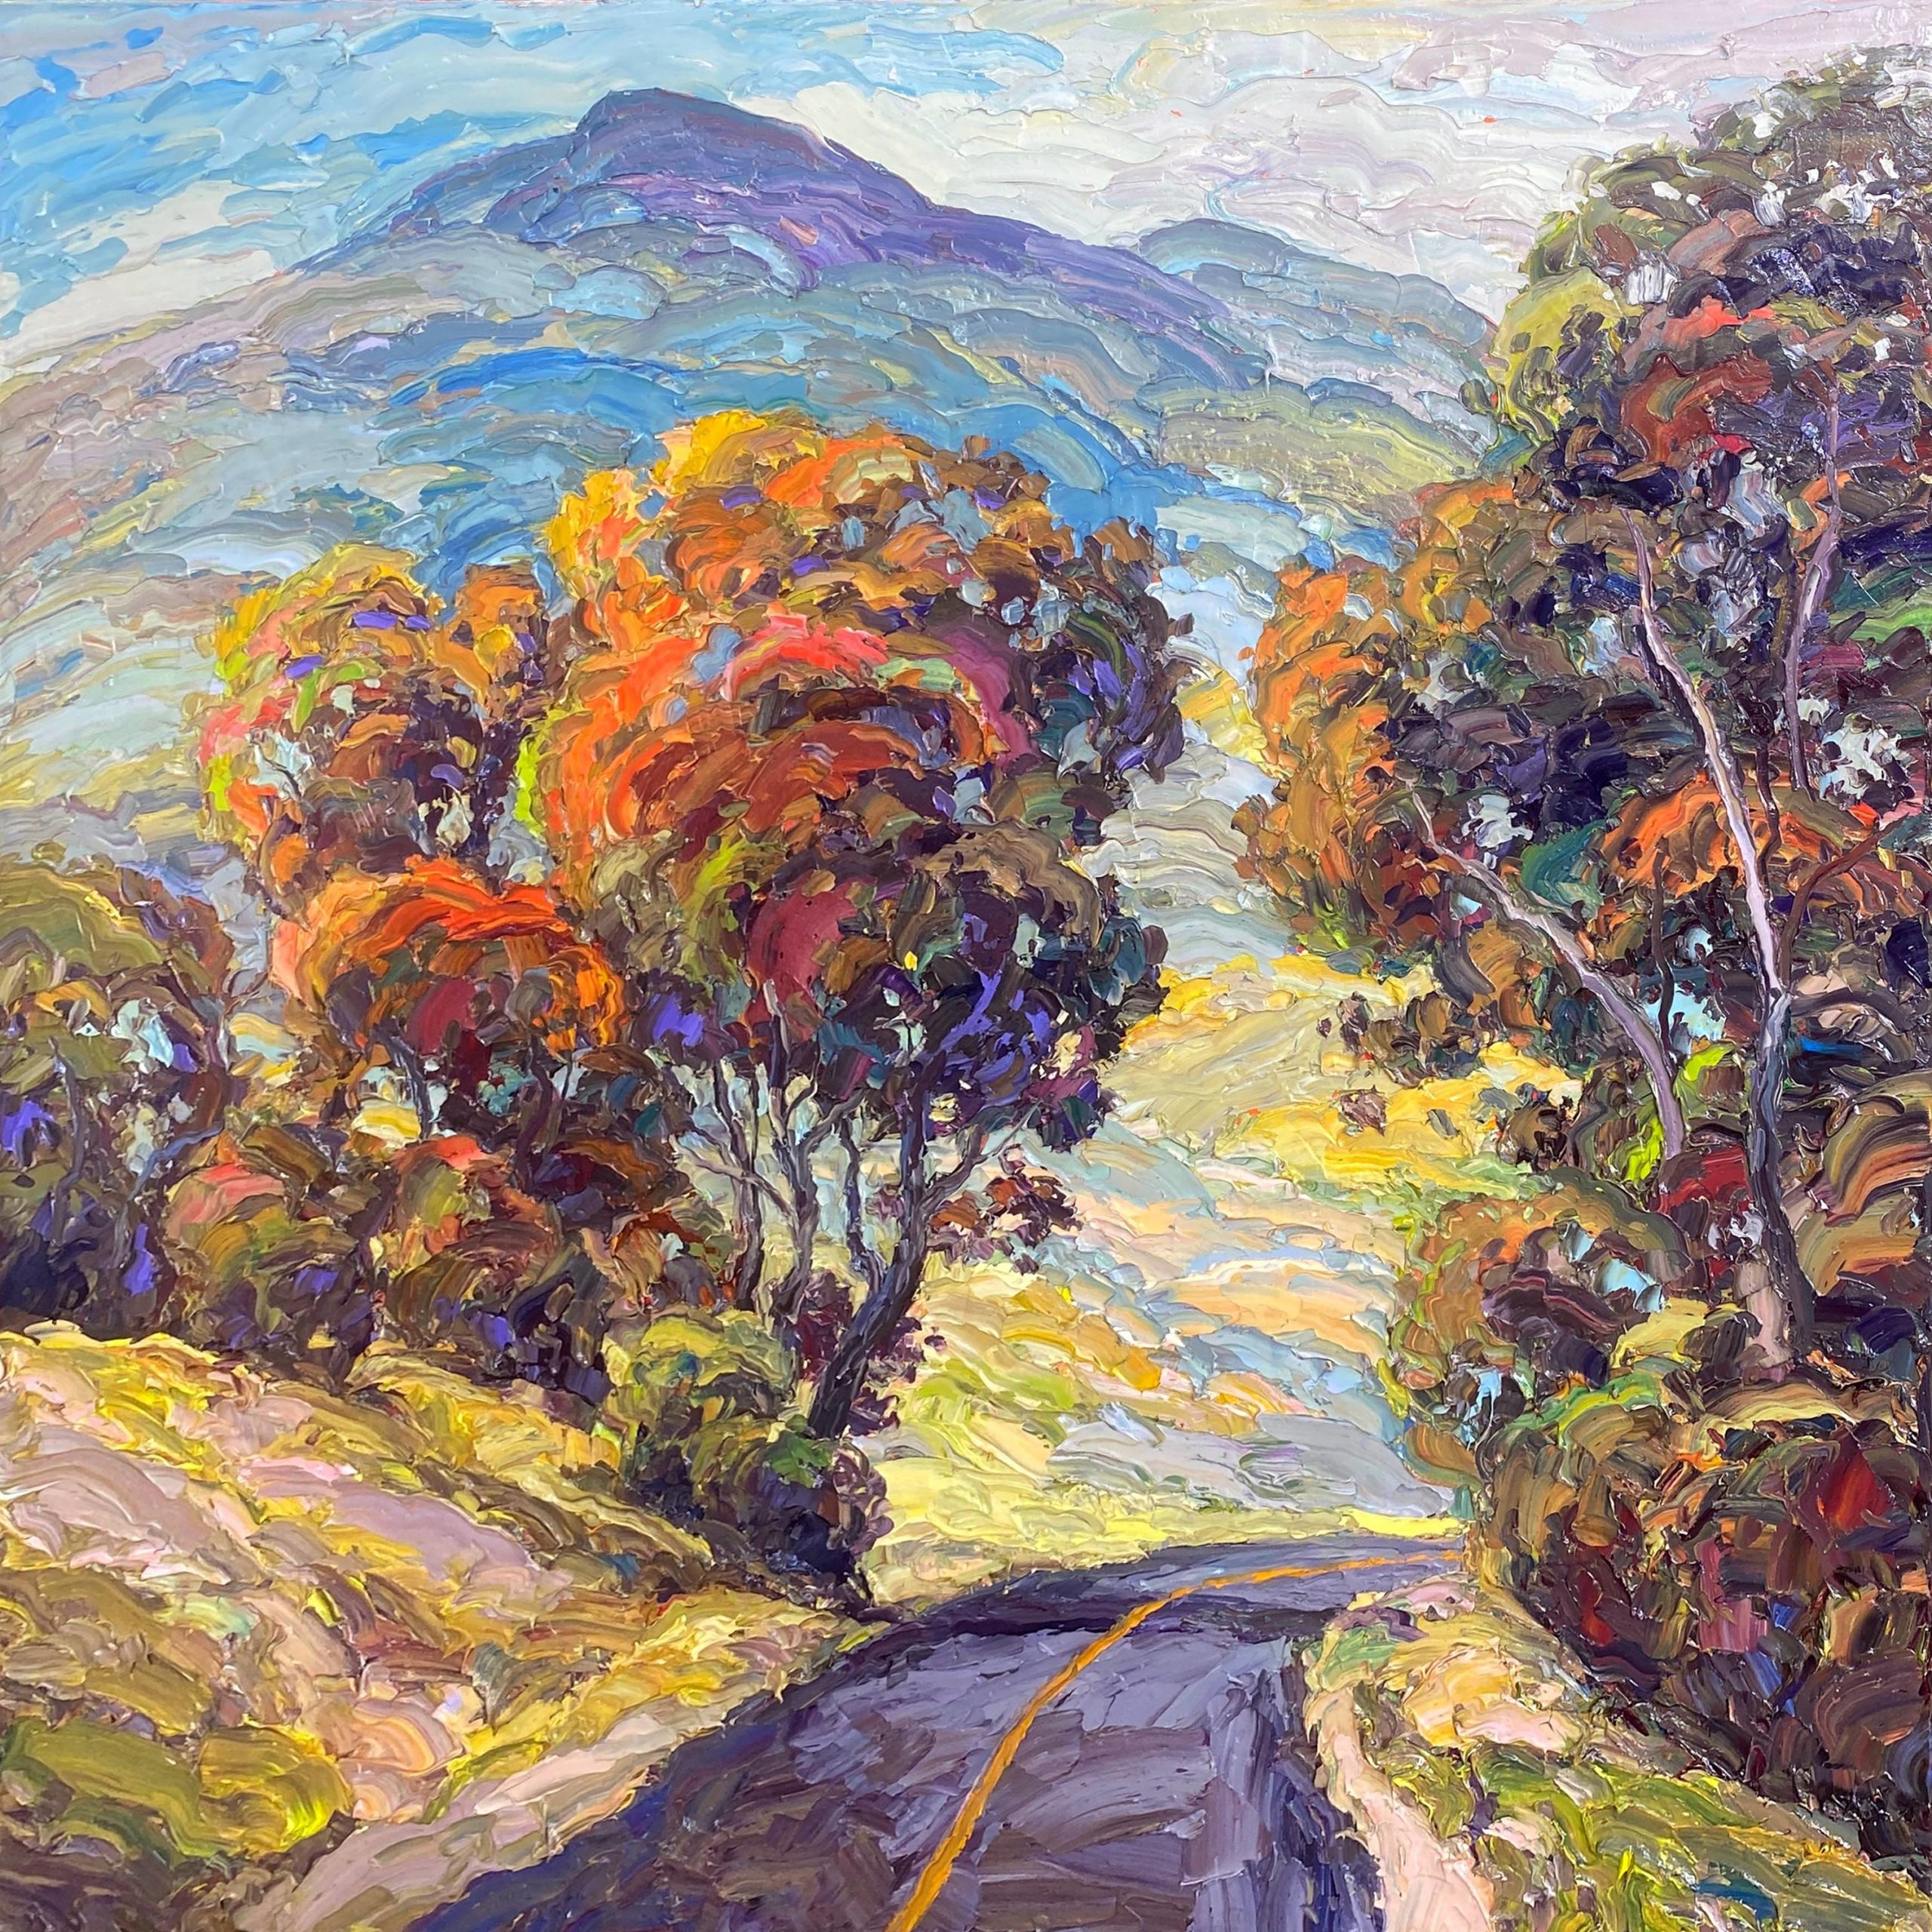 Brad Teare, "Miracle of Autumn," 2022, Oil on canvas, 36 x 36 inches, Image courtesy of the artist